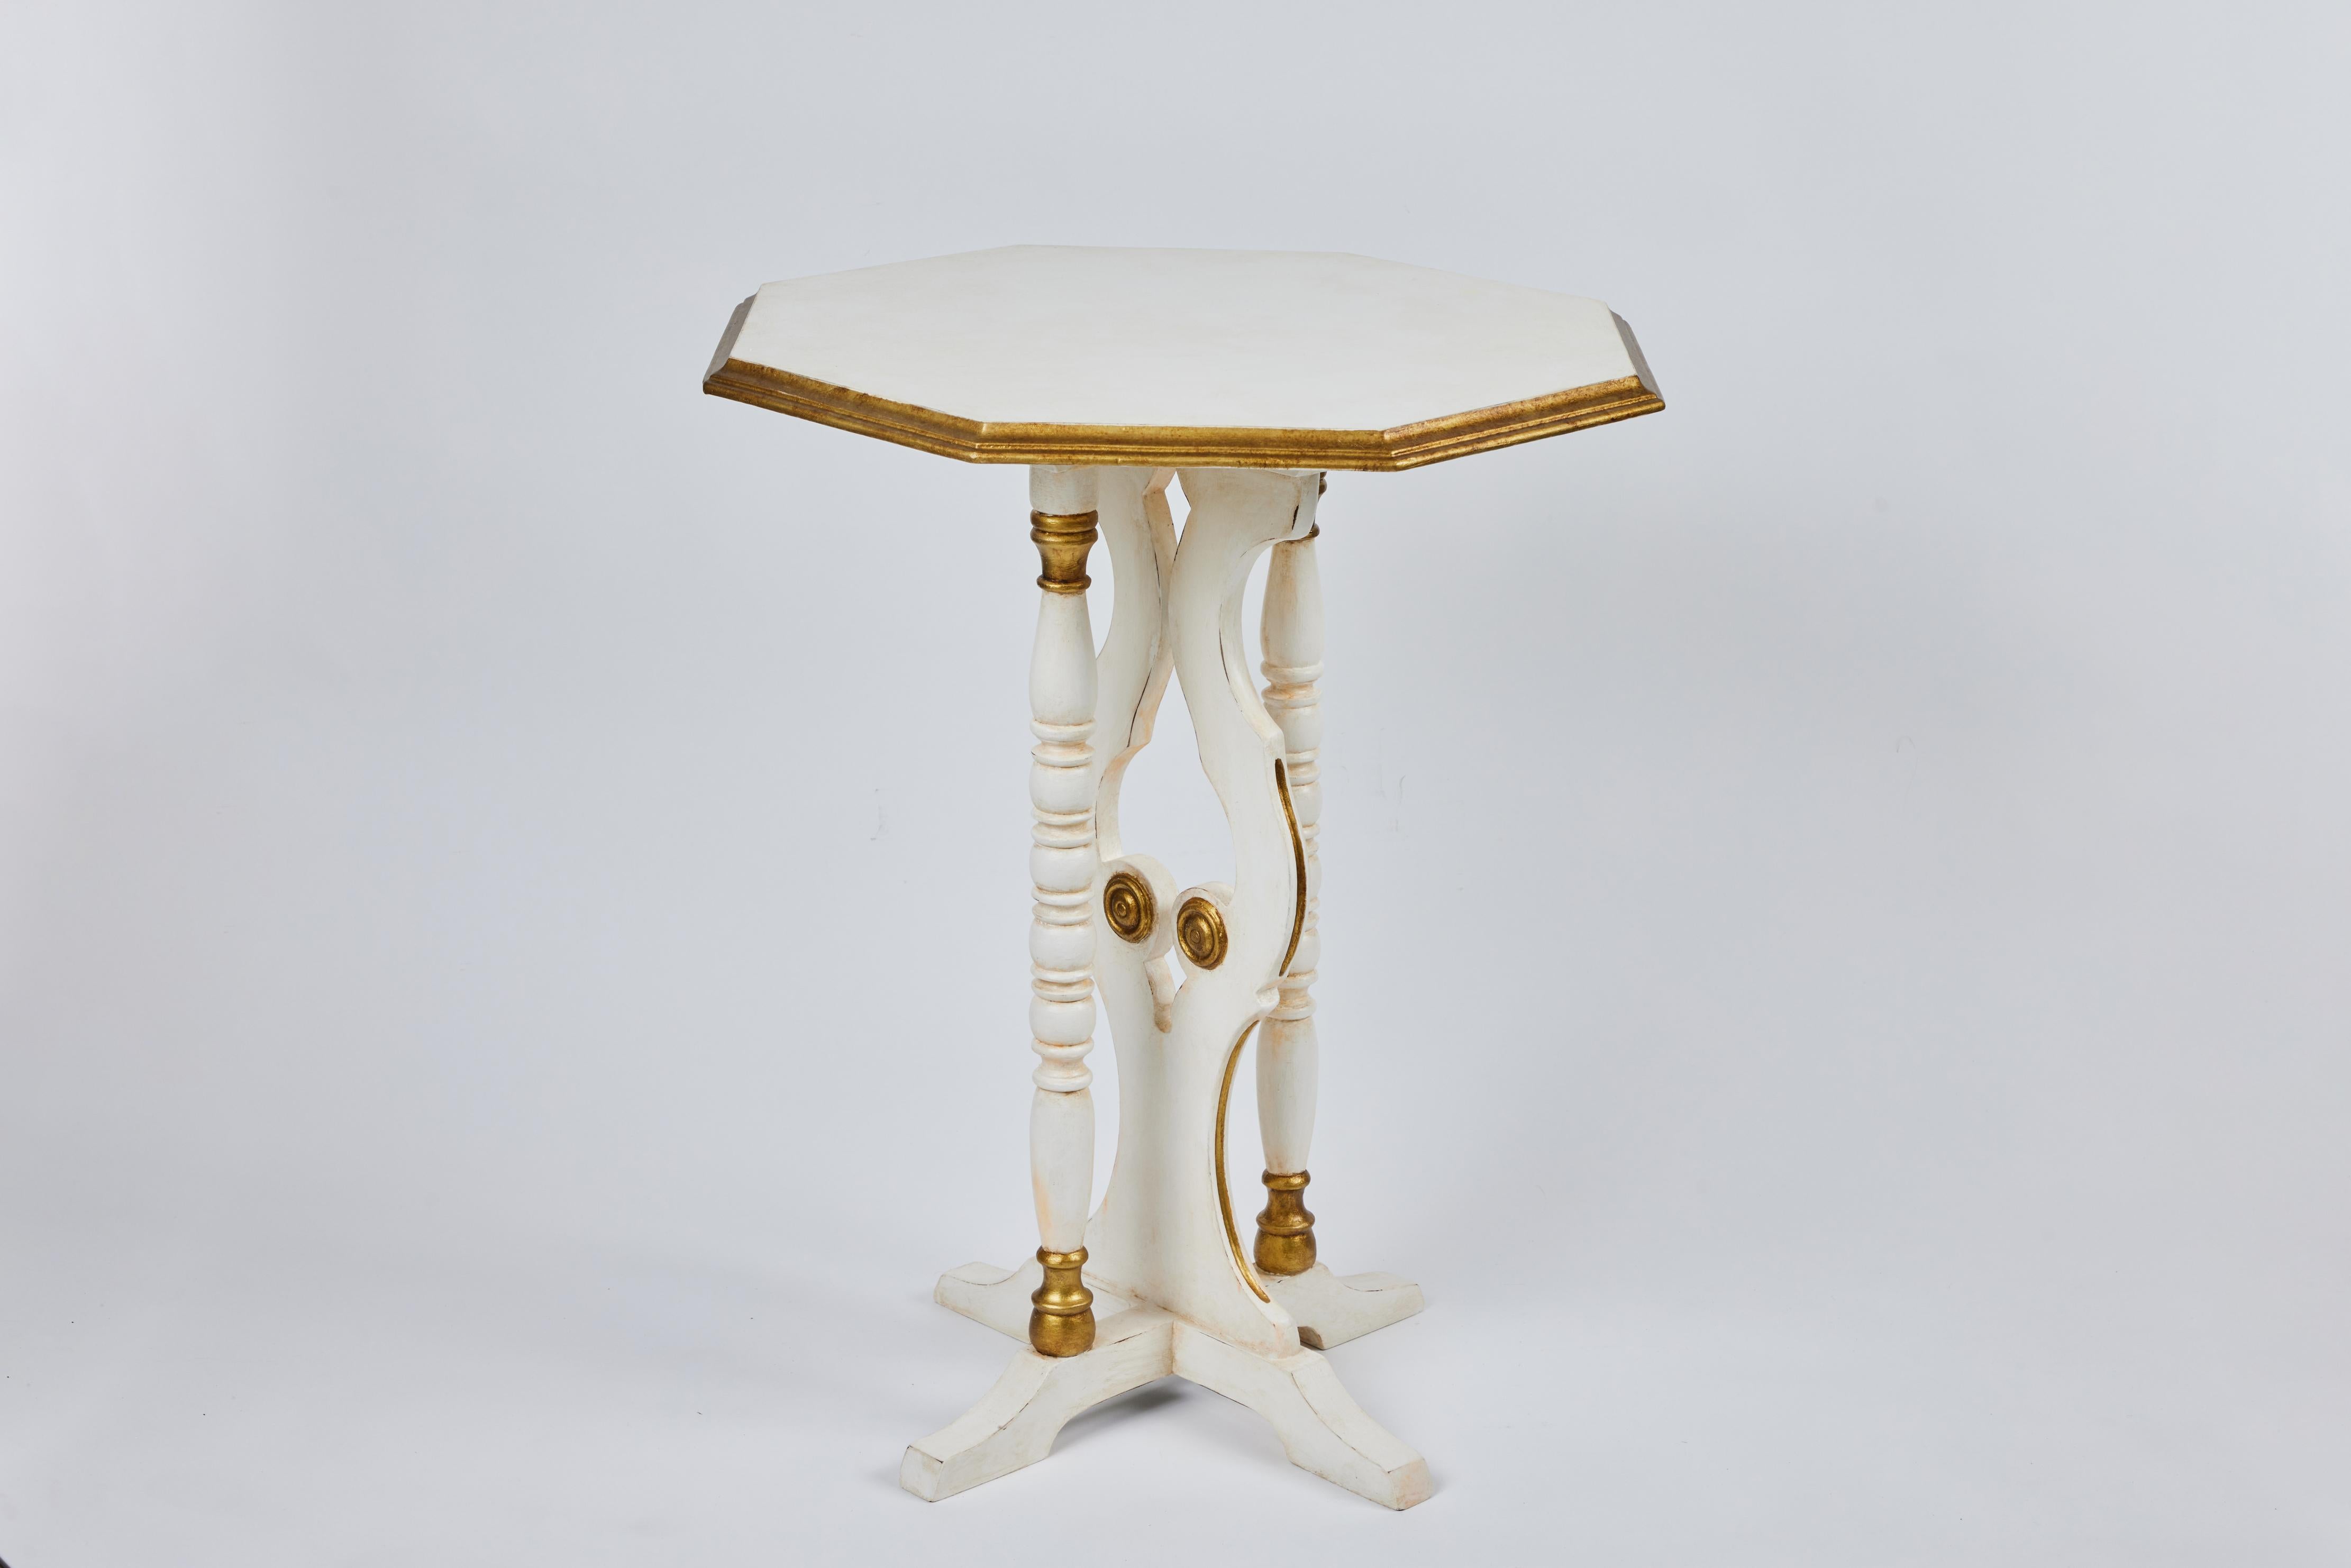 Small Vintage Octagon side table with footed base & turned legs. Newly painted in antique white w/ antique gold details.

Measures: 20.25